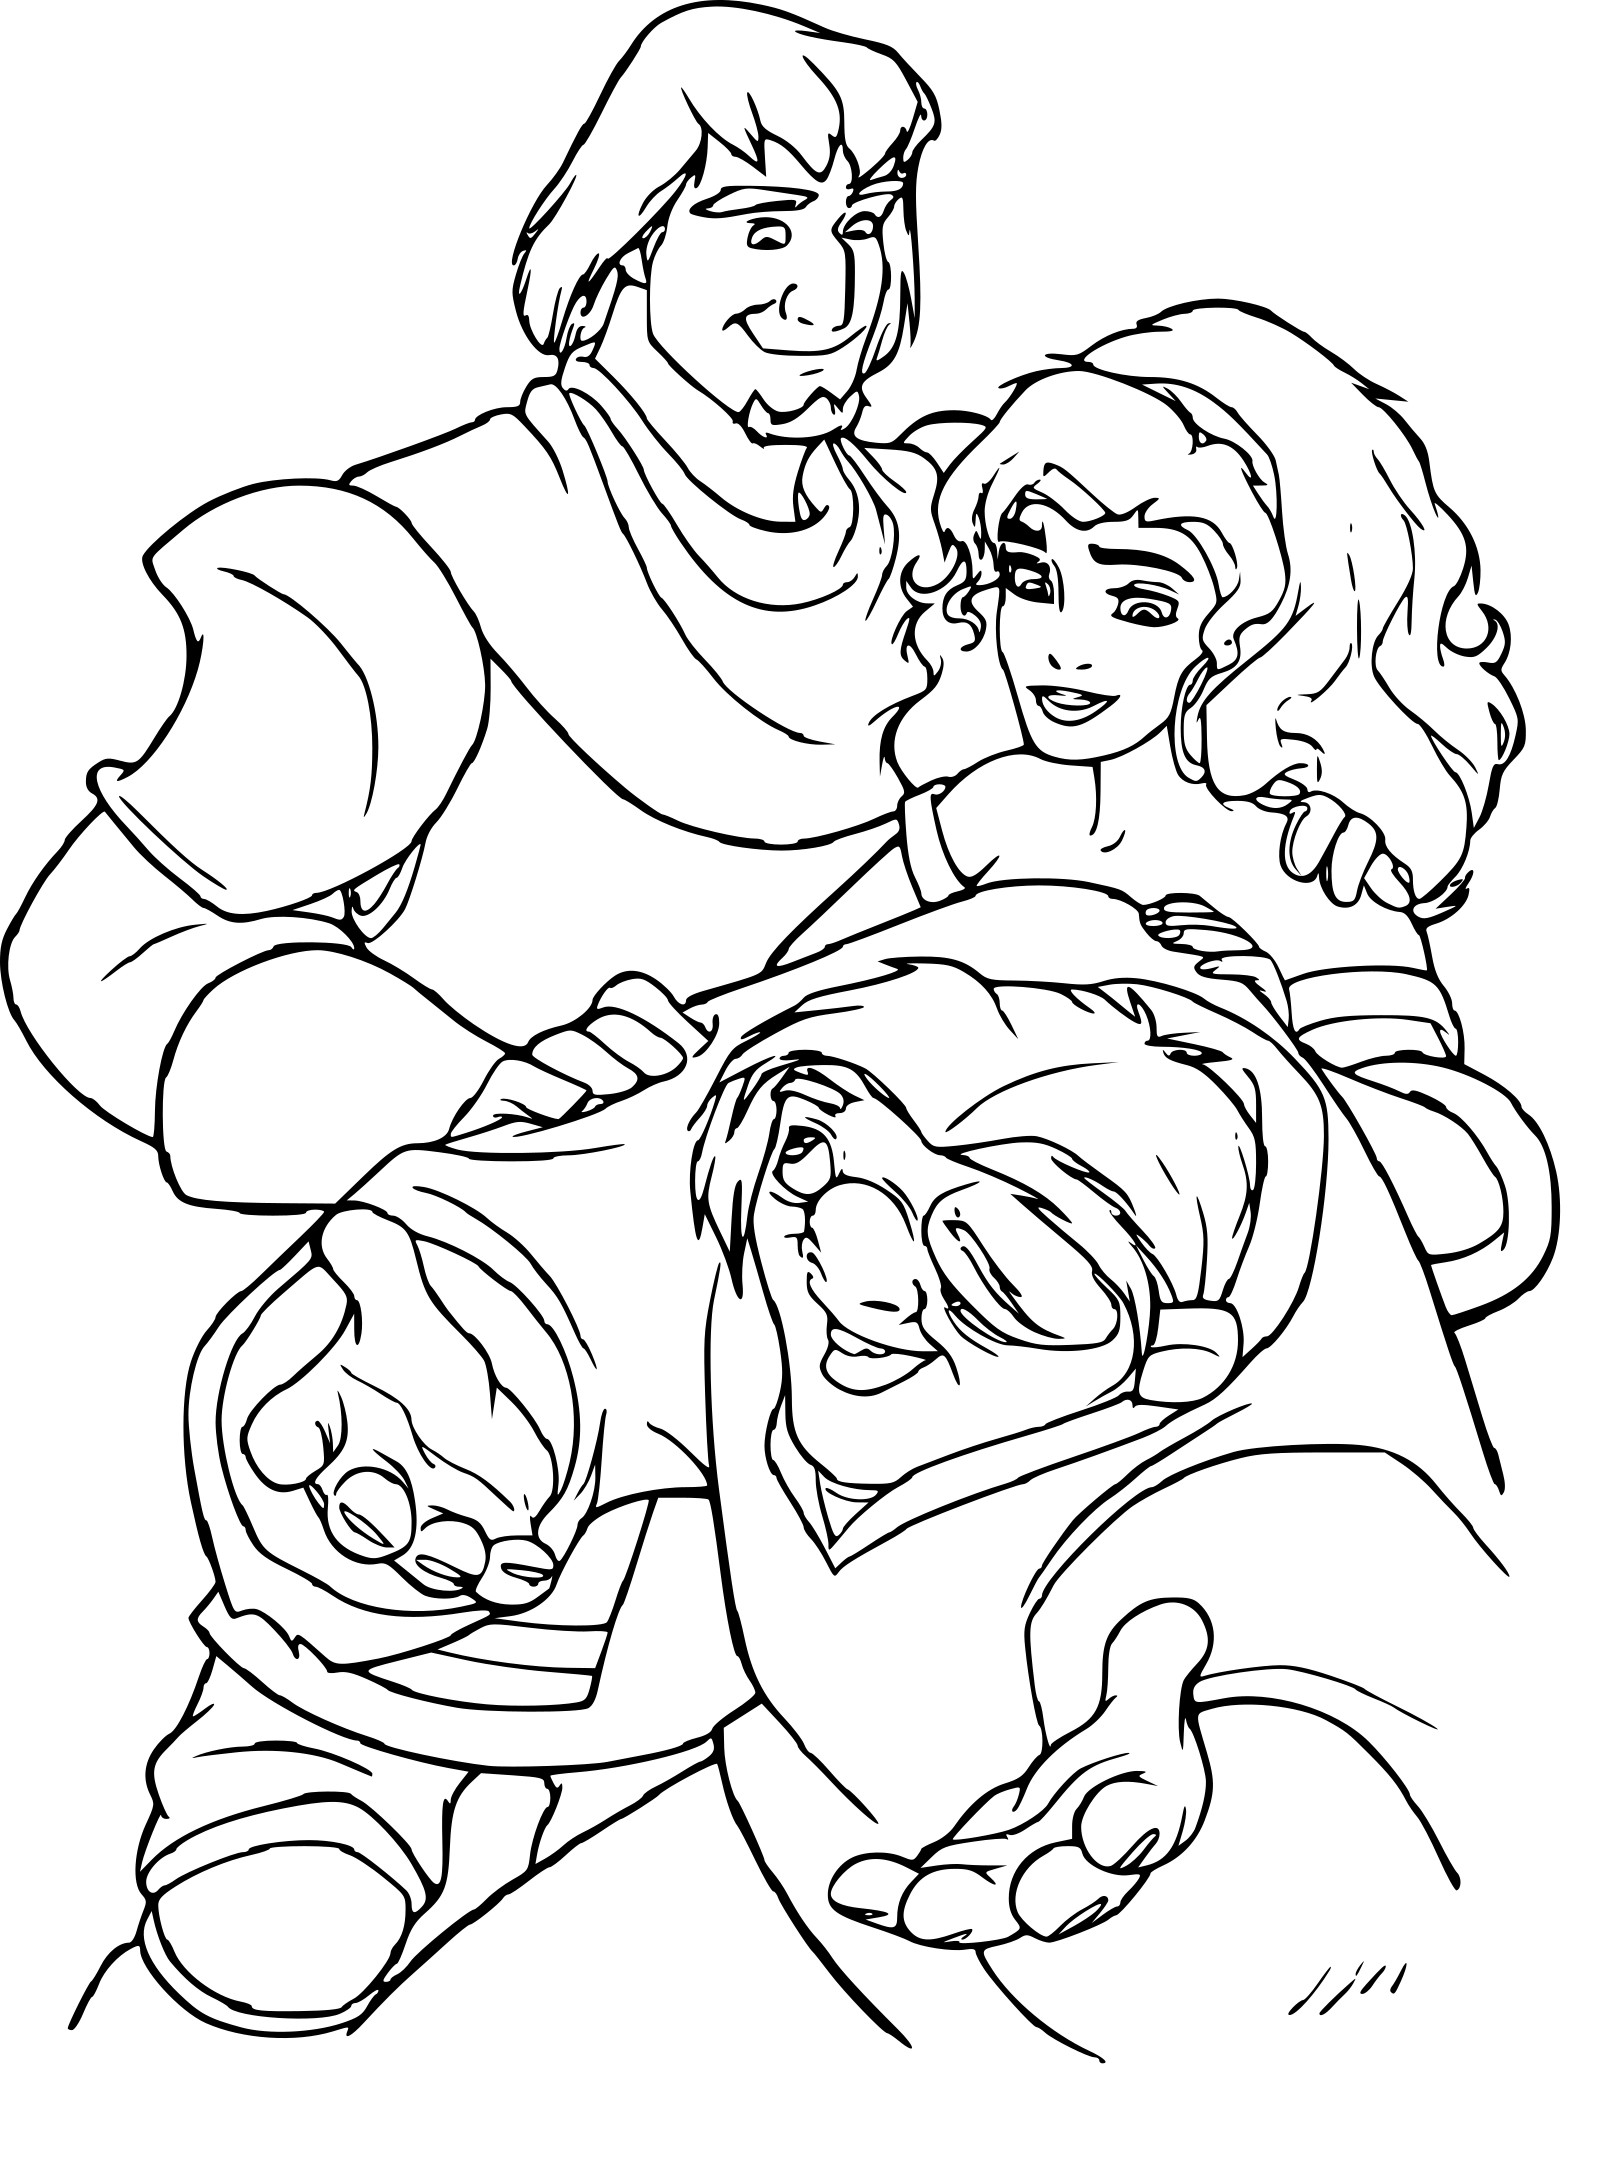 The Hunchback Of Notre Dame coloring page